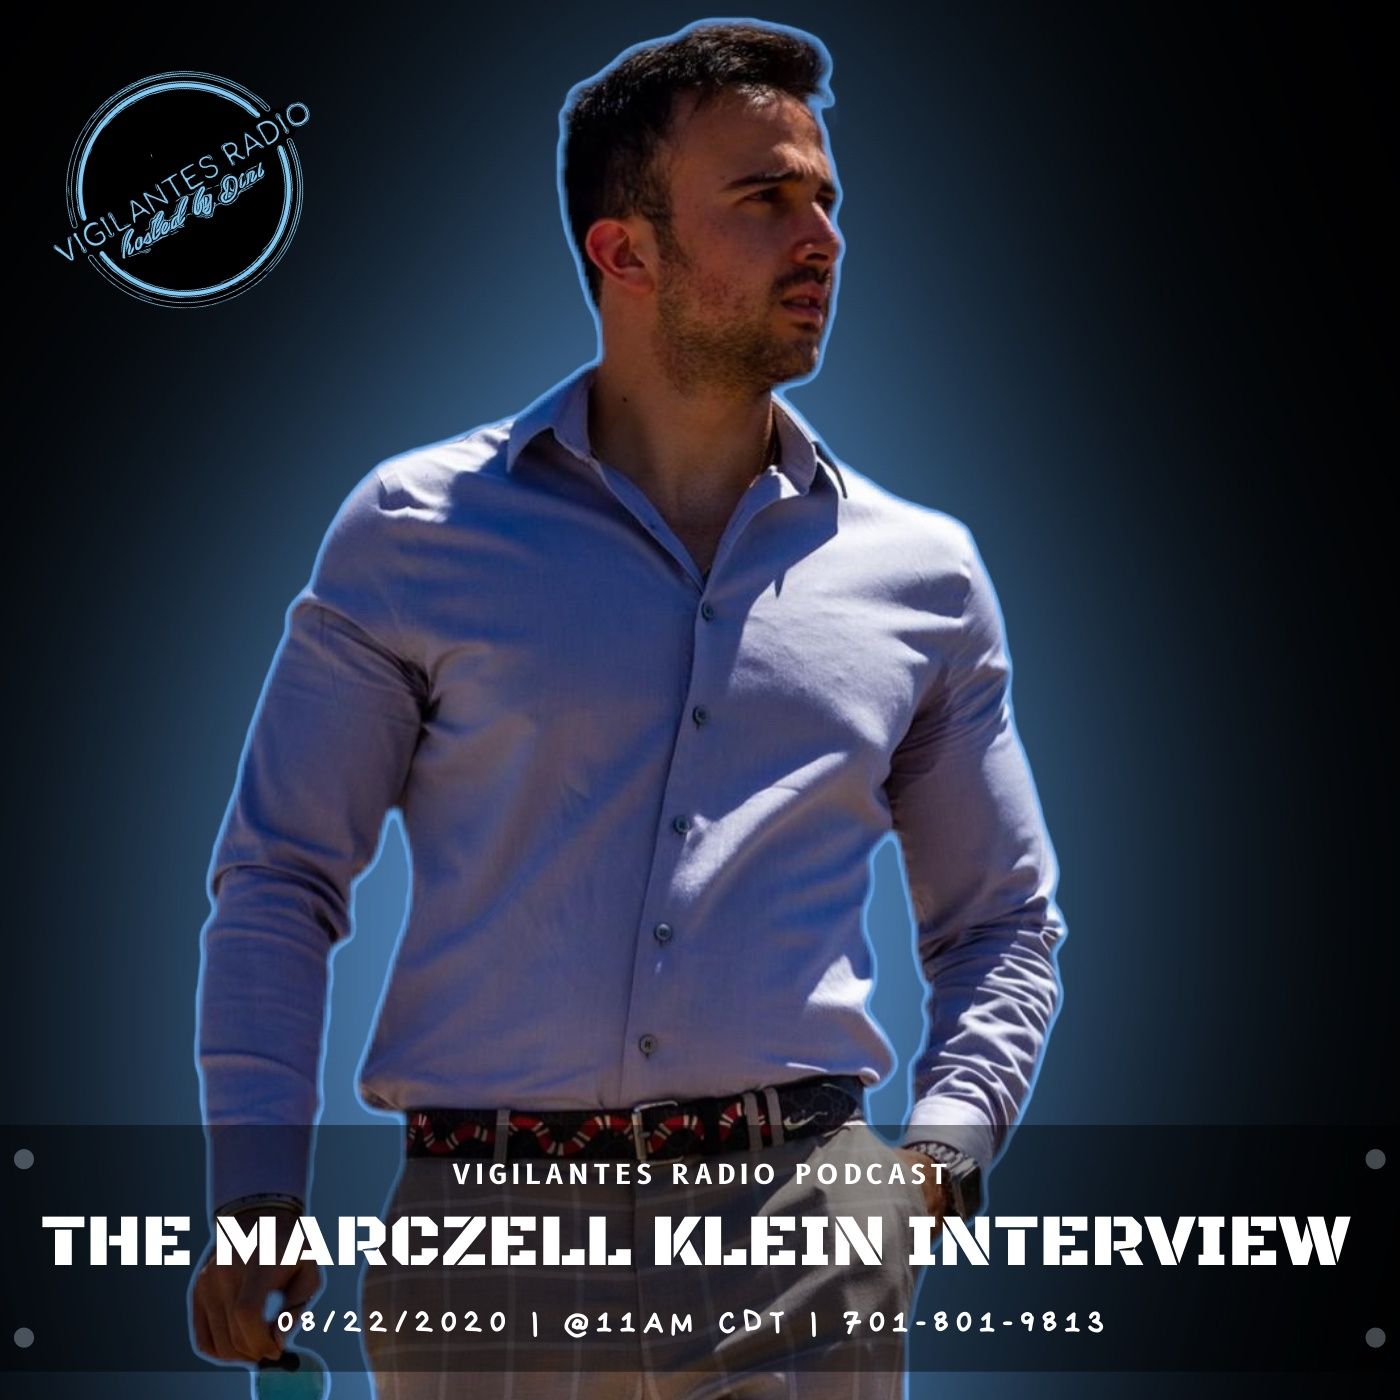 The Marczell Klein Interview. Image